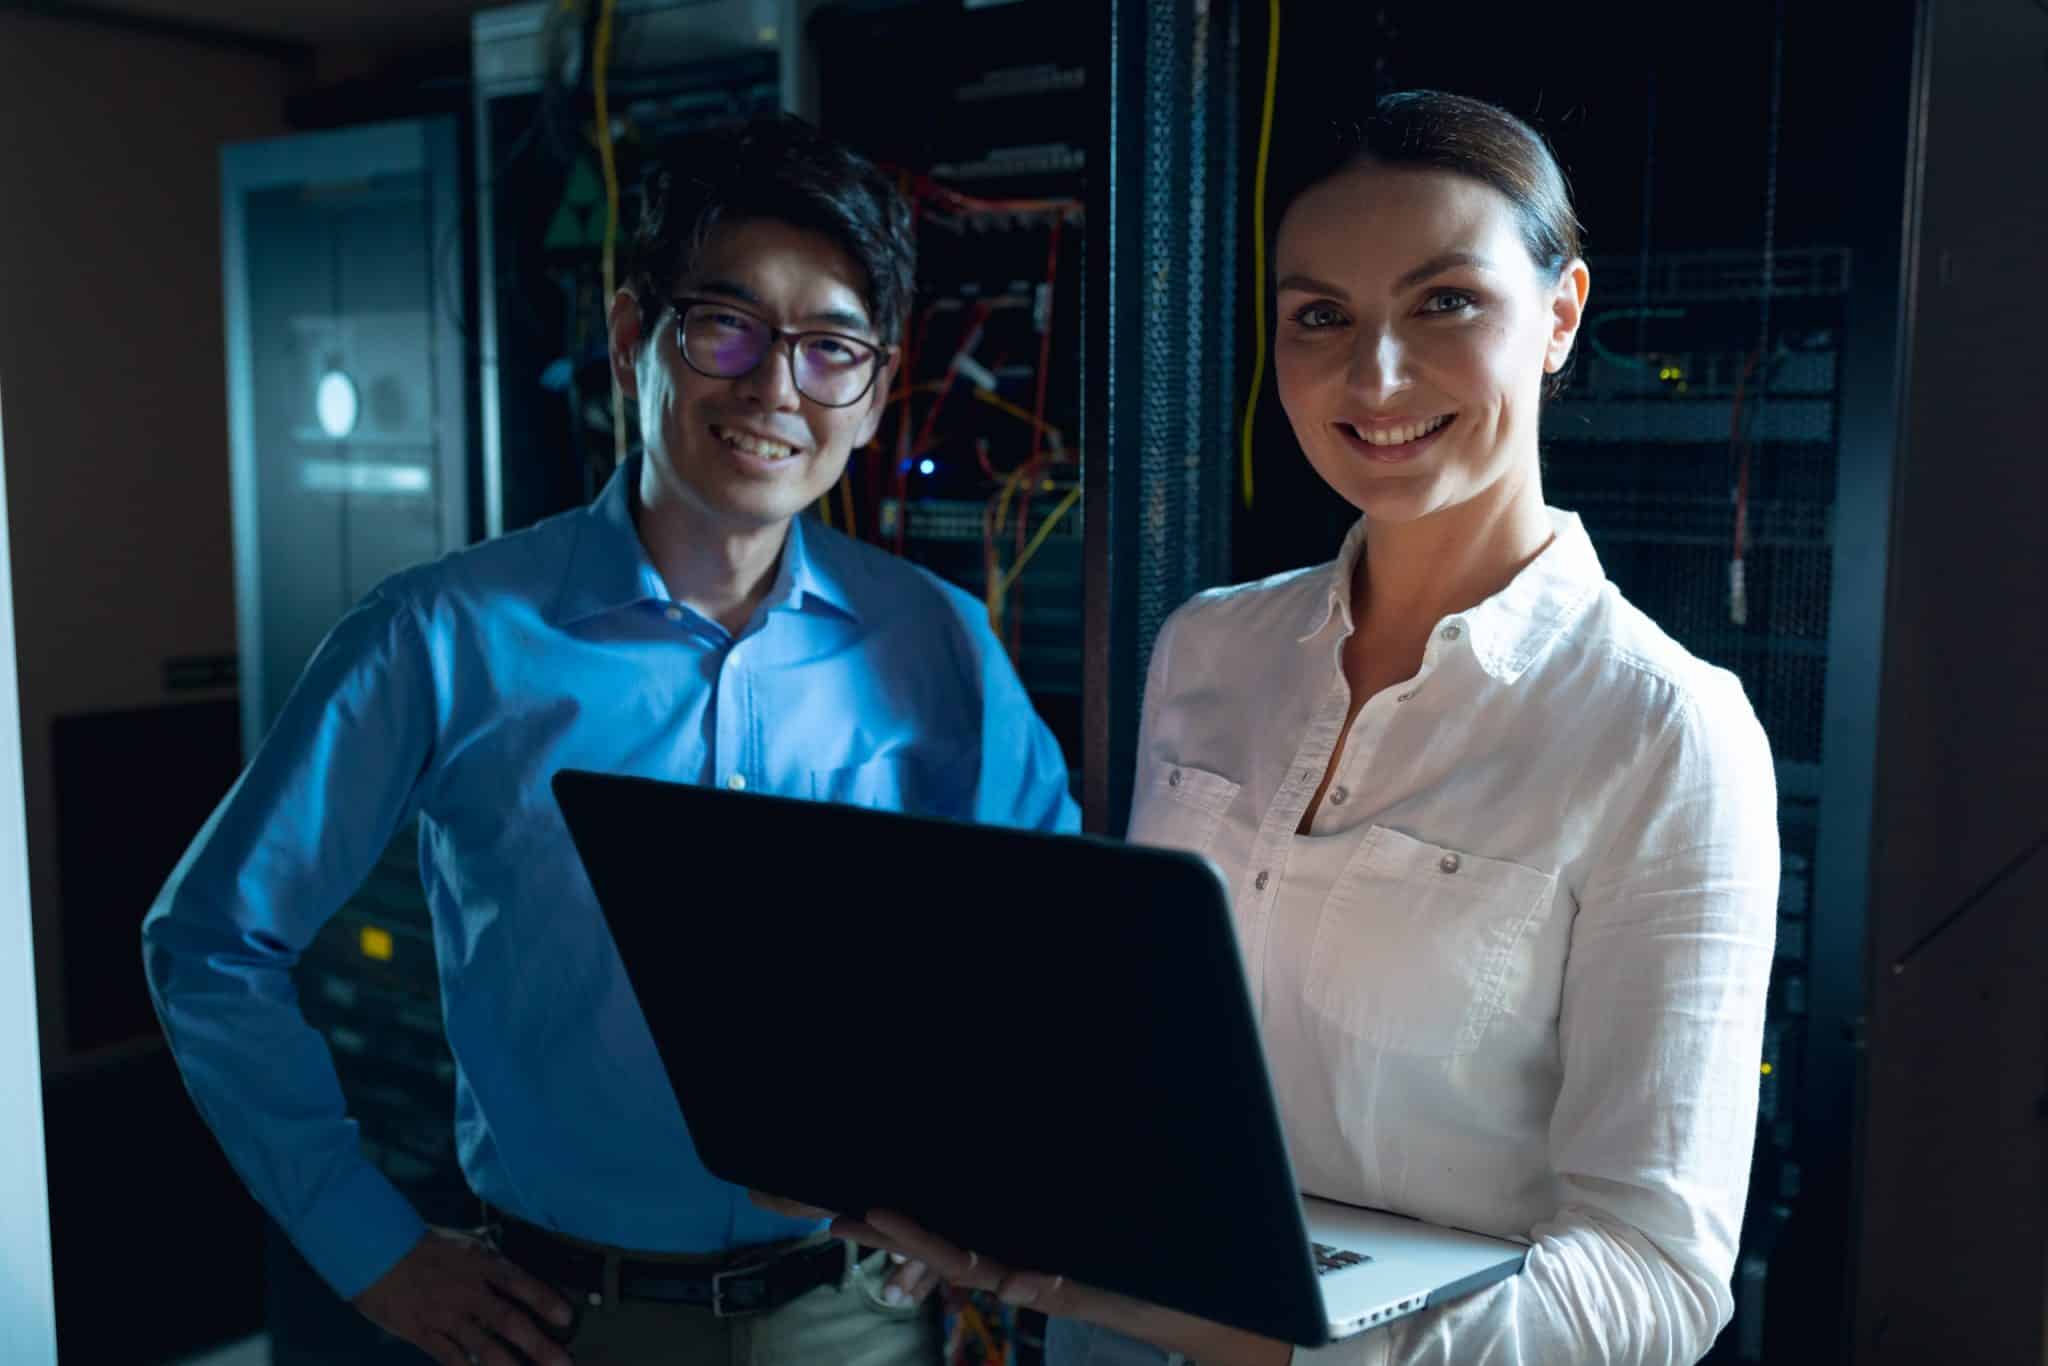 male and female engineers with laptop smiling in computer server room.